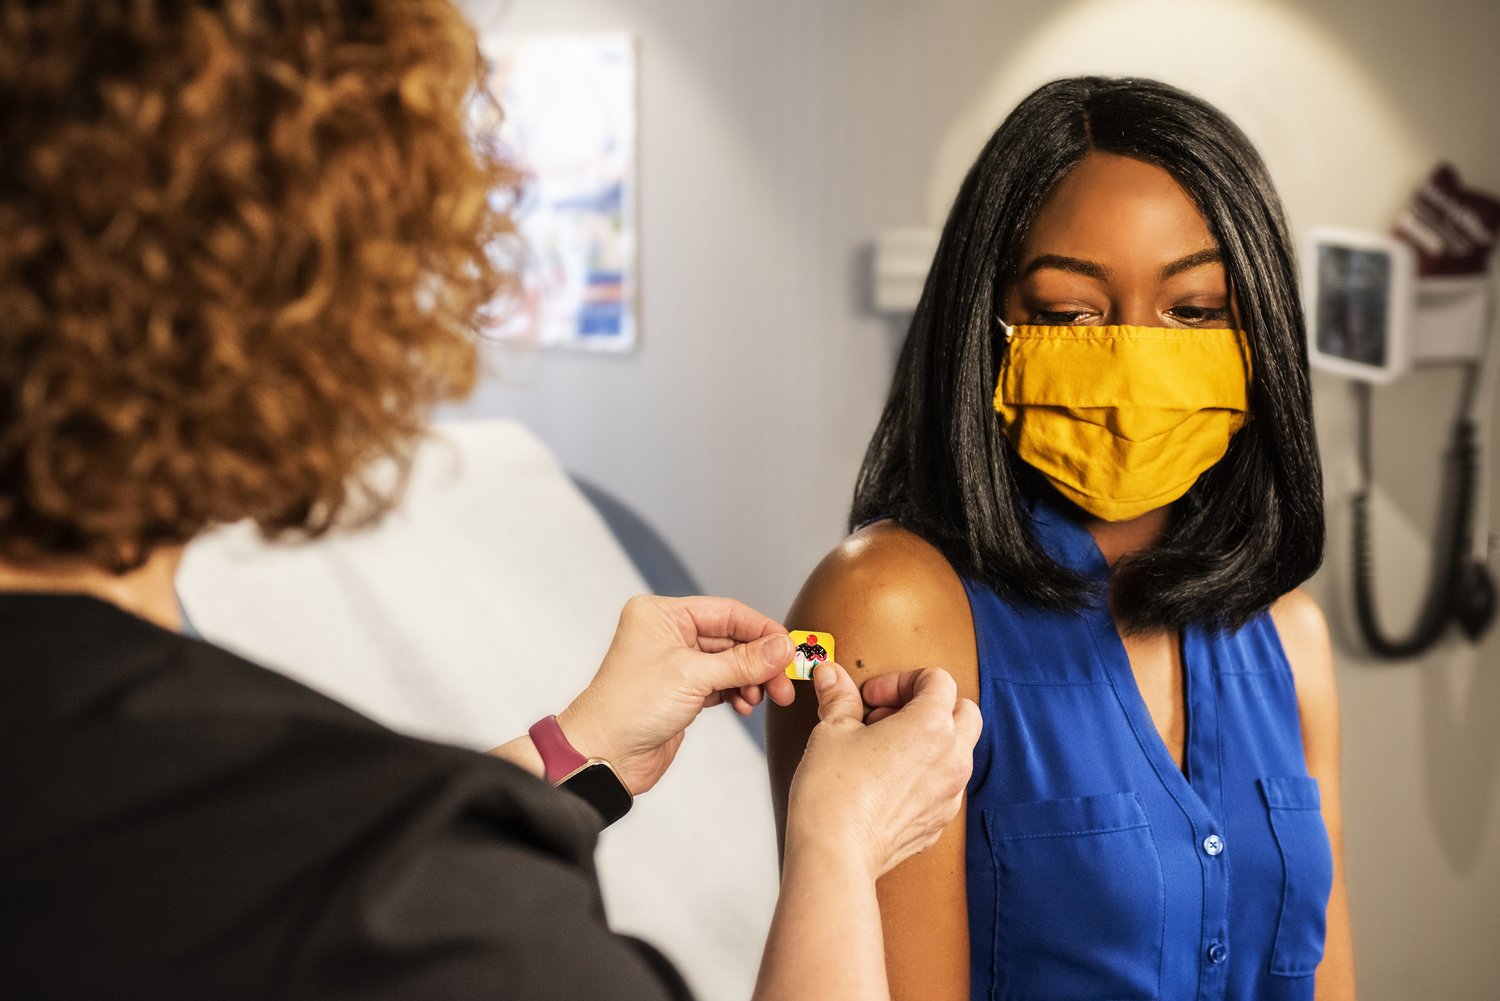 Young woman gets a COVID-19 vaccine shot.